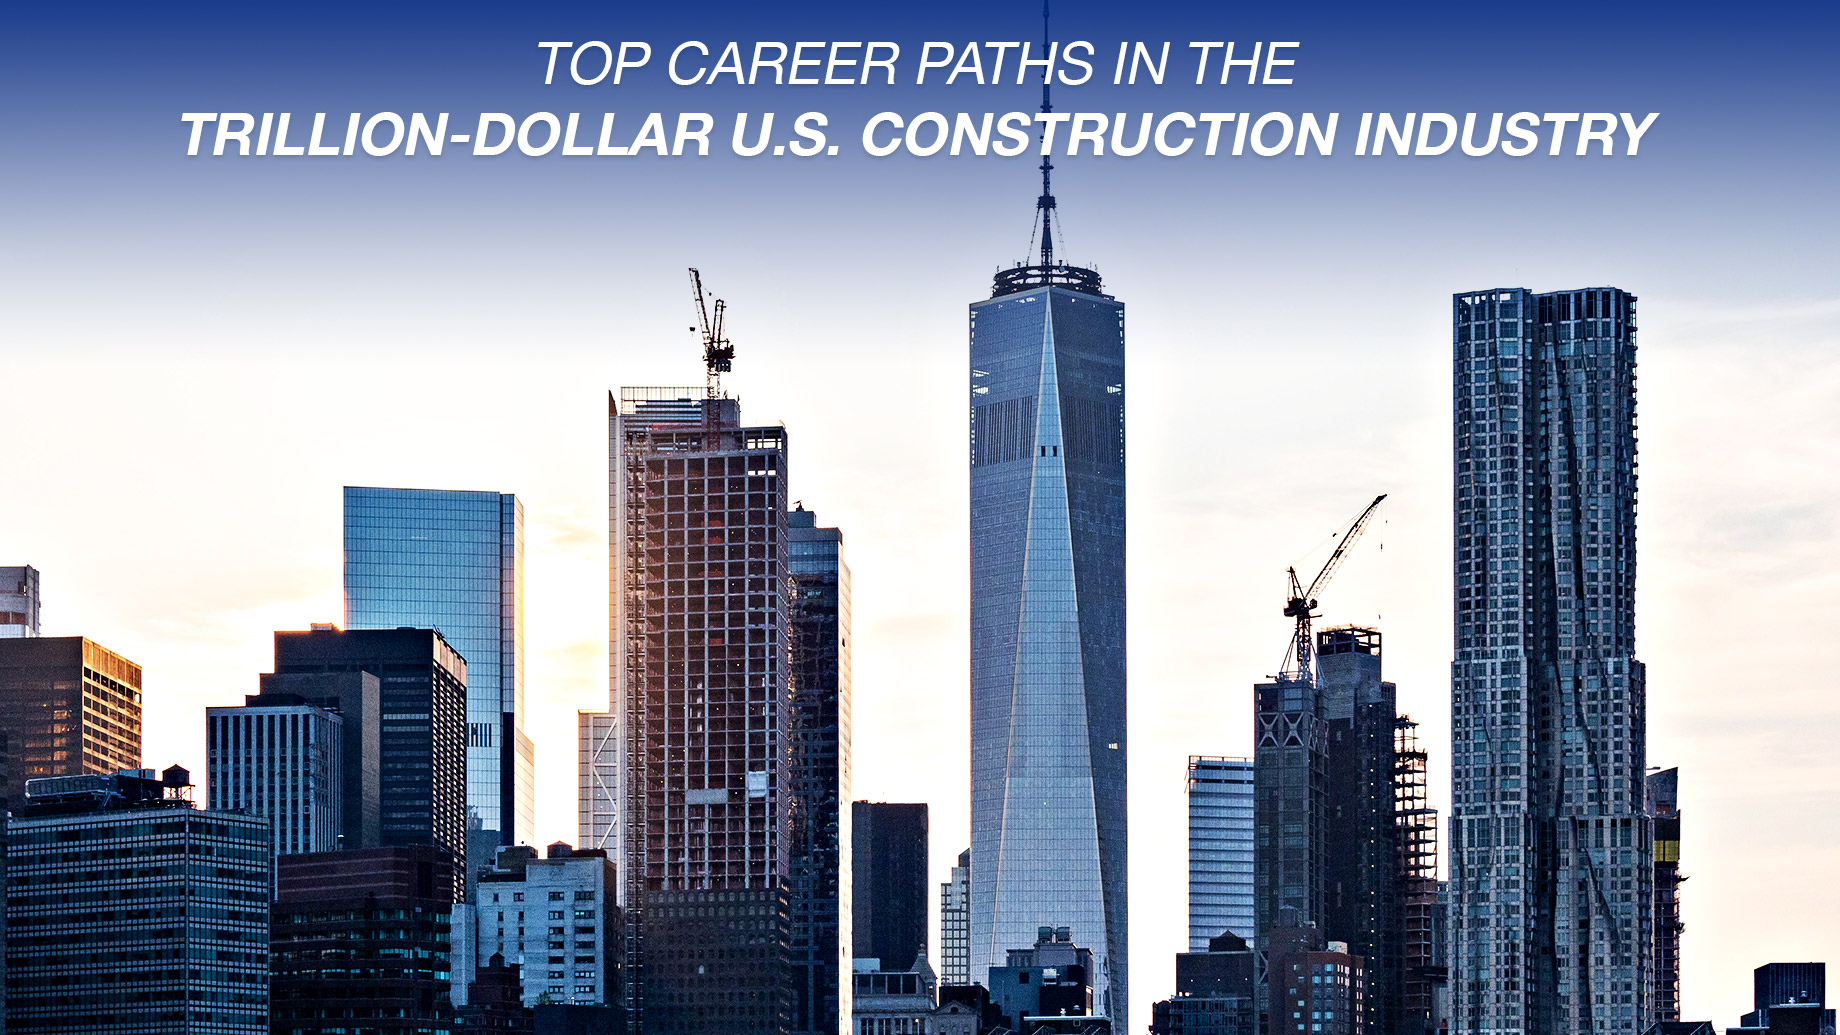 Top Career Paths in the Trillion-Dollar U.S. Construction Industry